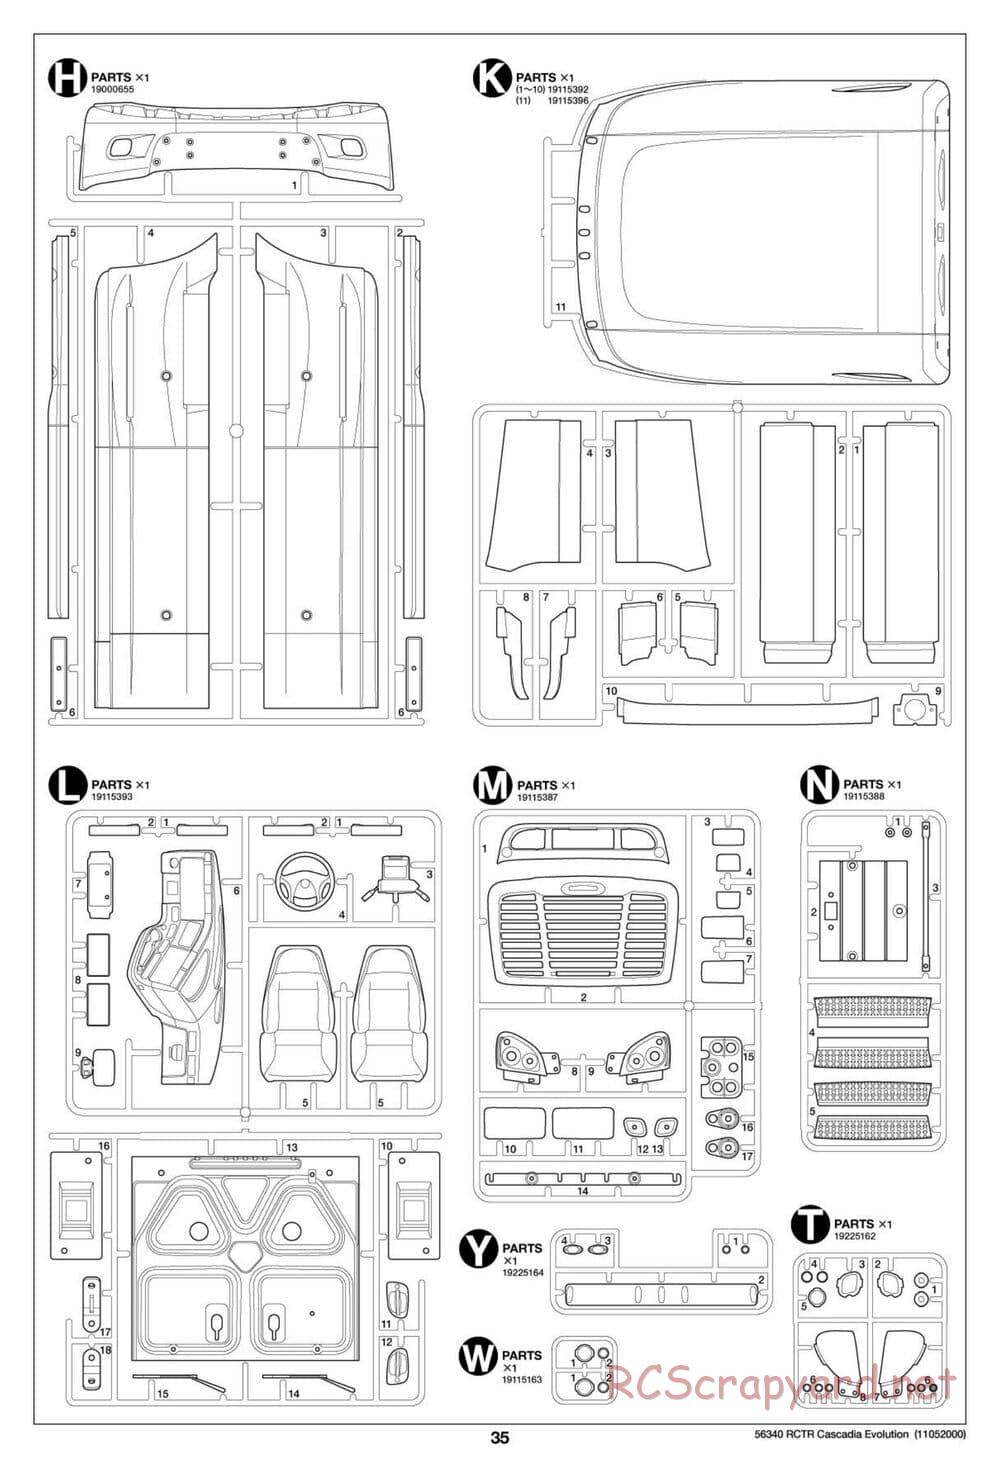 Tamiya - Freightliner Cascadia Evolution Tractor Truck Chassis - Manual - Page 35